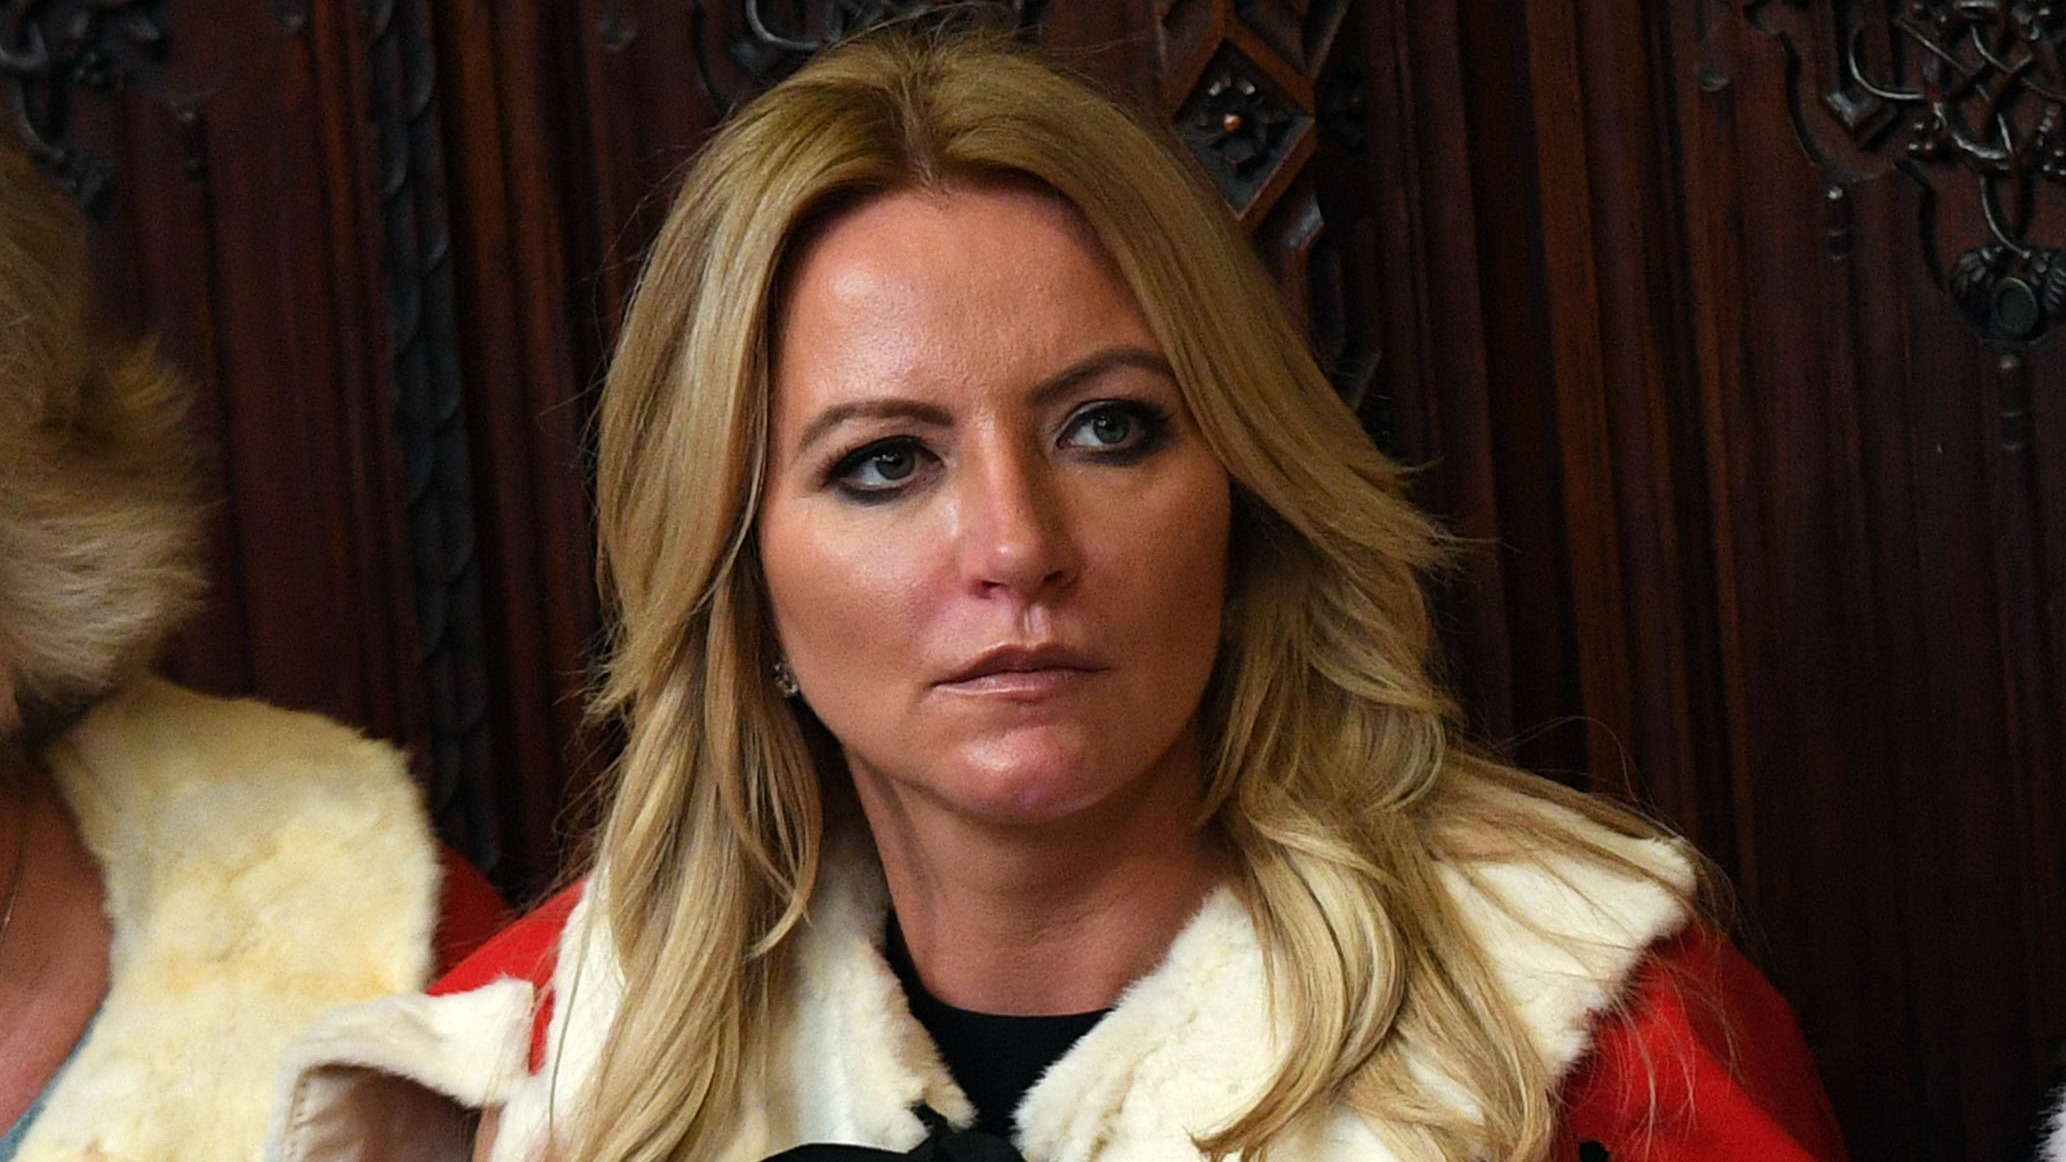 Mone’s assets frozen in PPE Medpro investigation